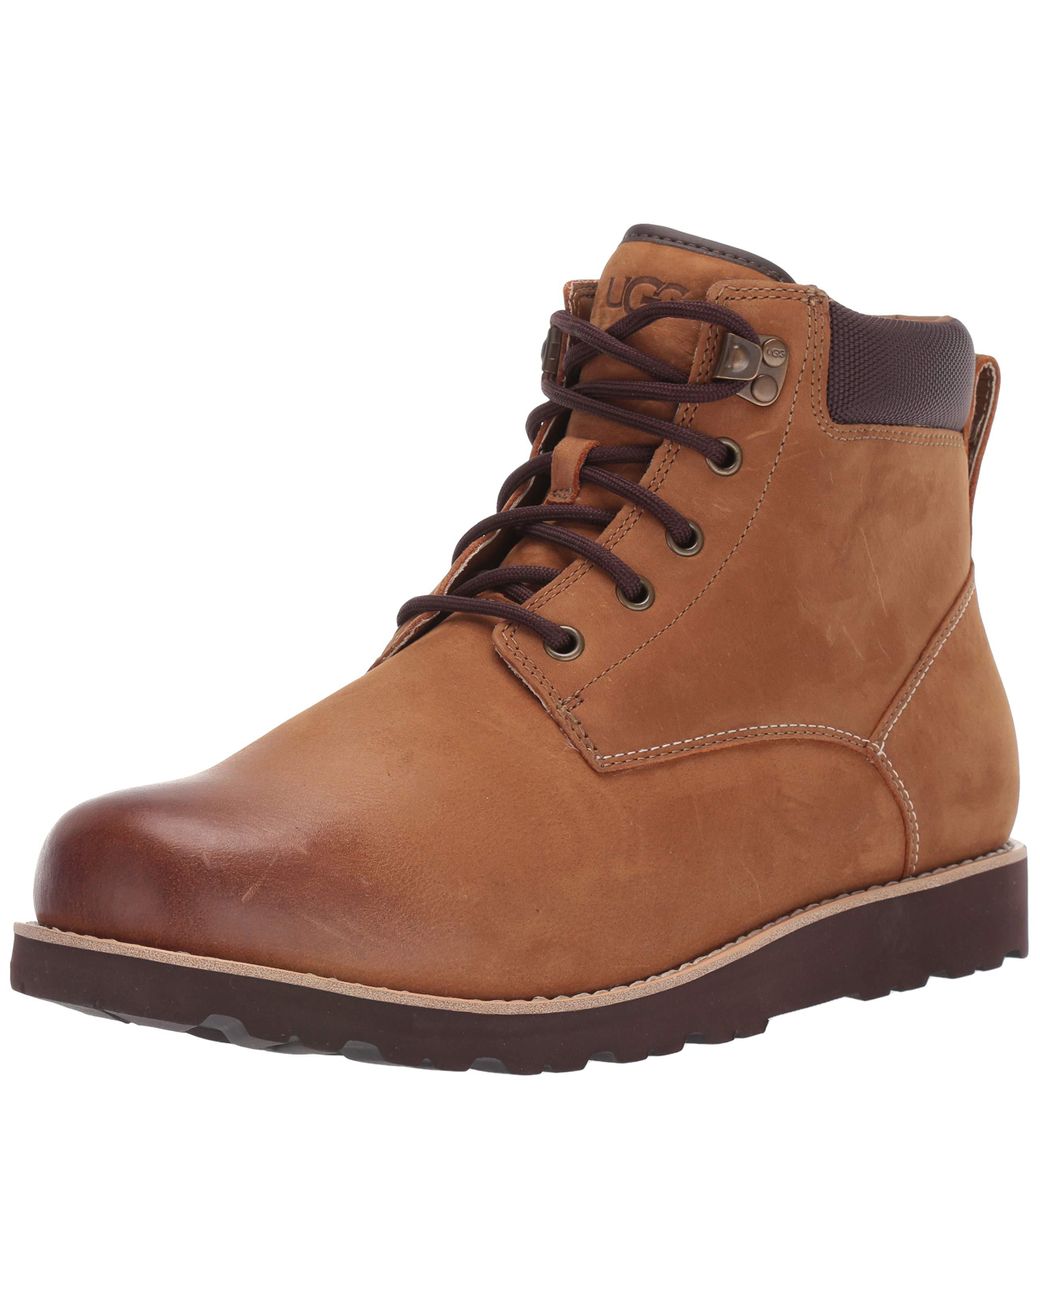 UGG Leather Seton Tl Snow Boot in Chestnut (Brown) for Men - Lyst